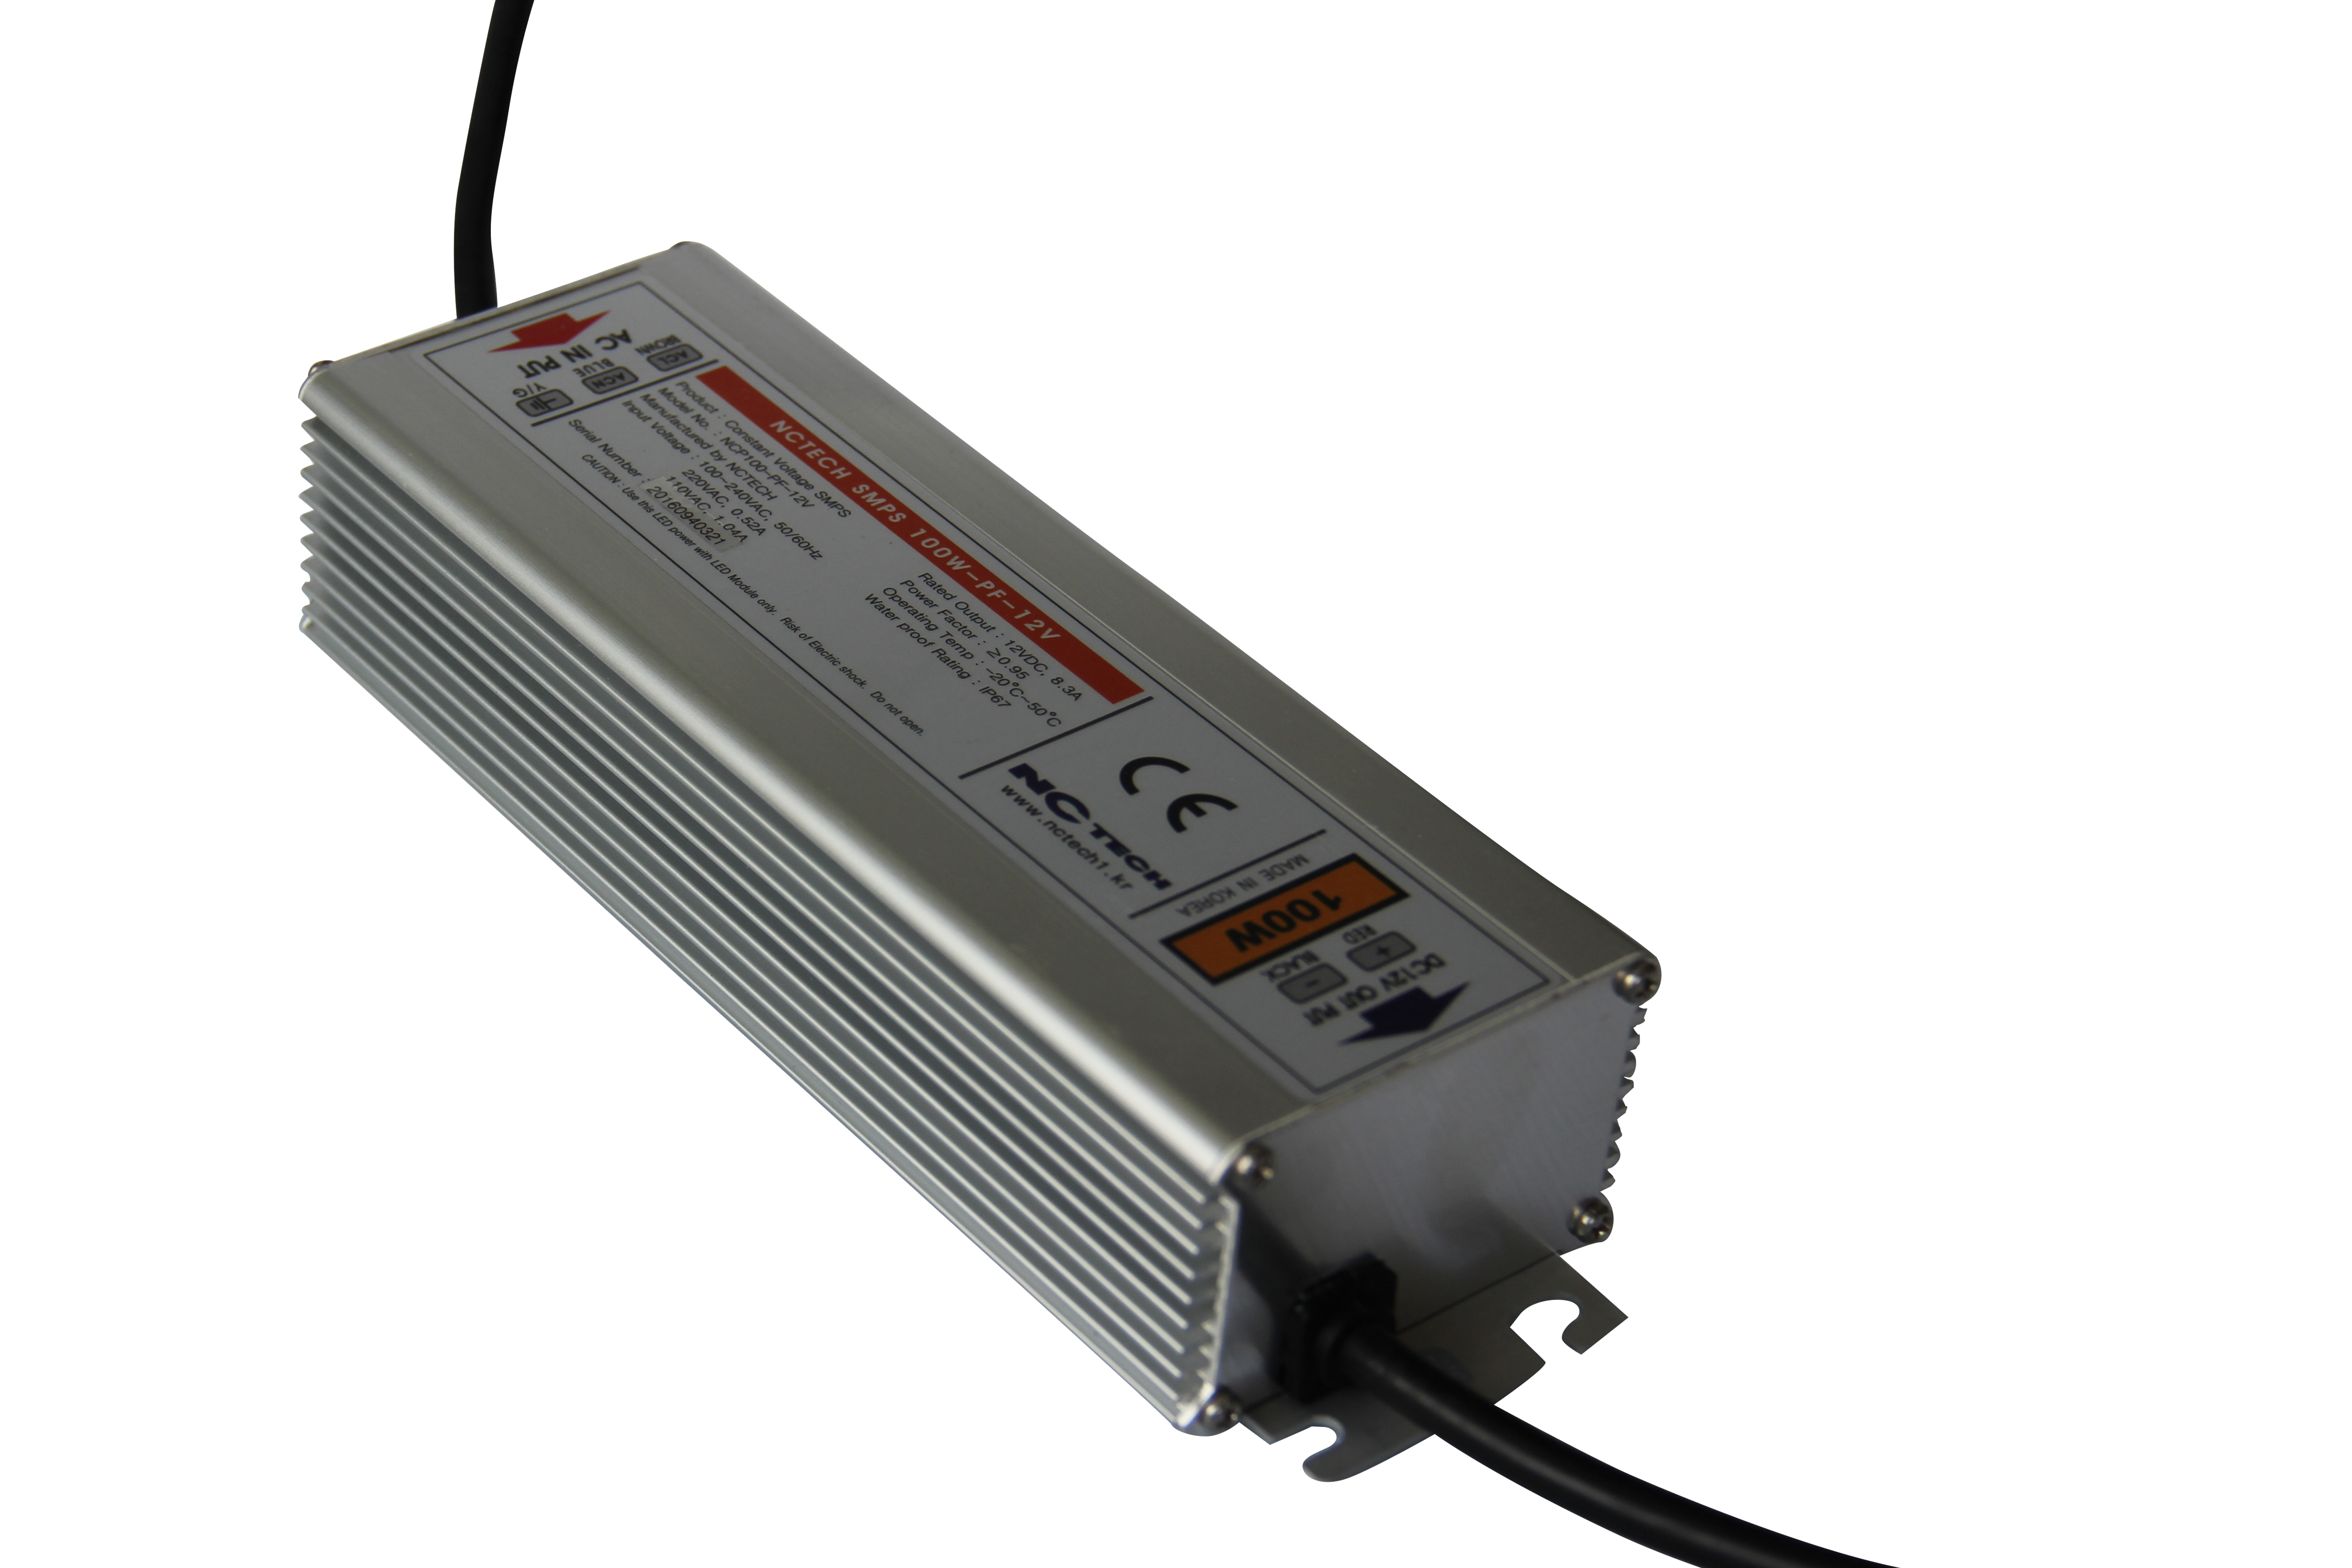 NCP-100W 